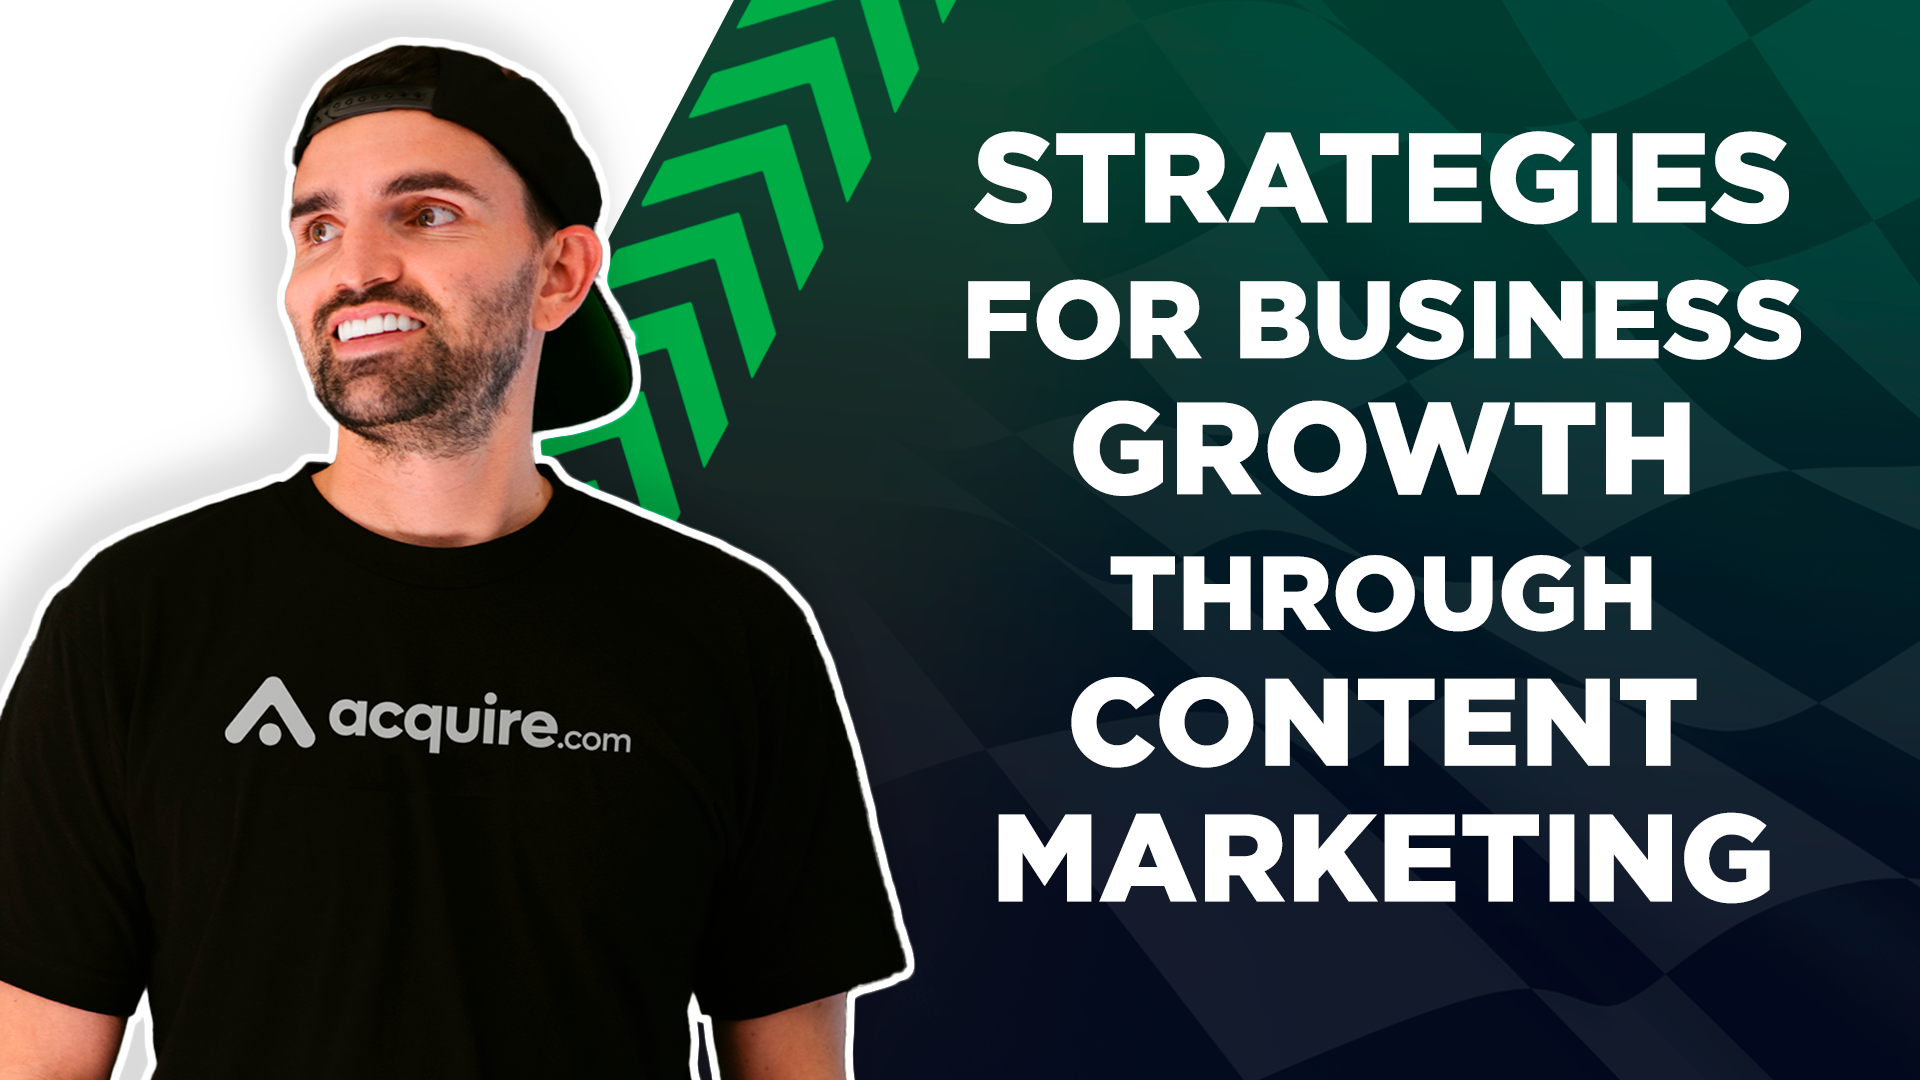 Podcast Pit Stop: Andrew Gazdecki on Strategies for Business Growth Through Content Marketing